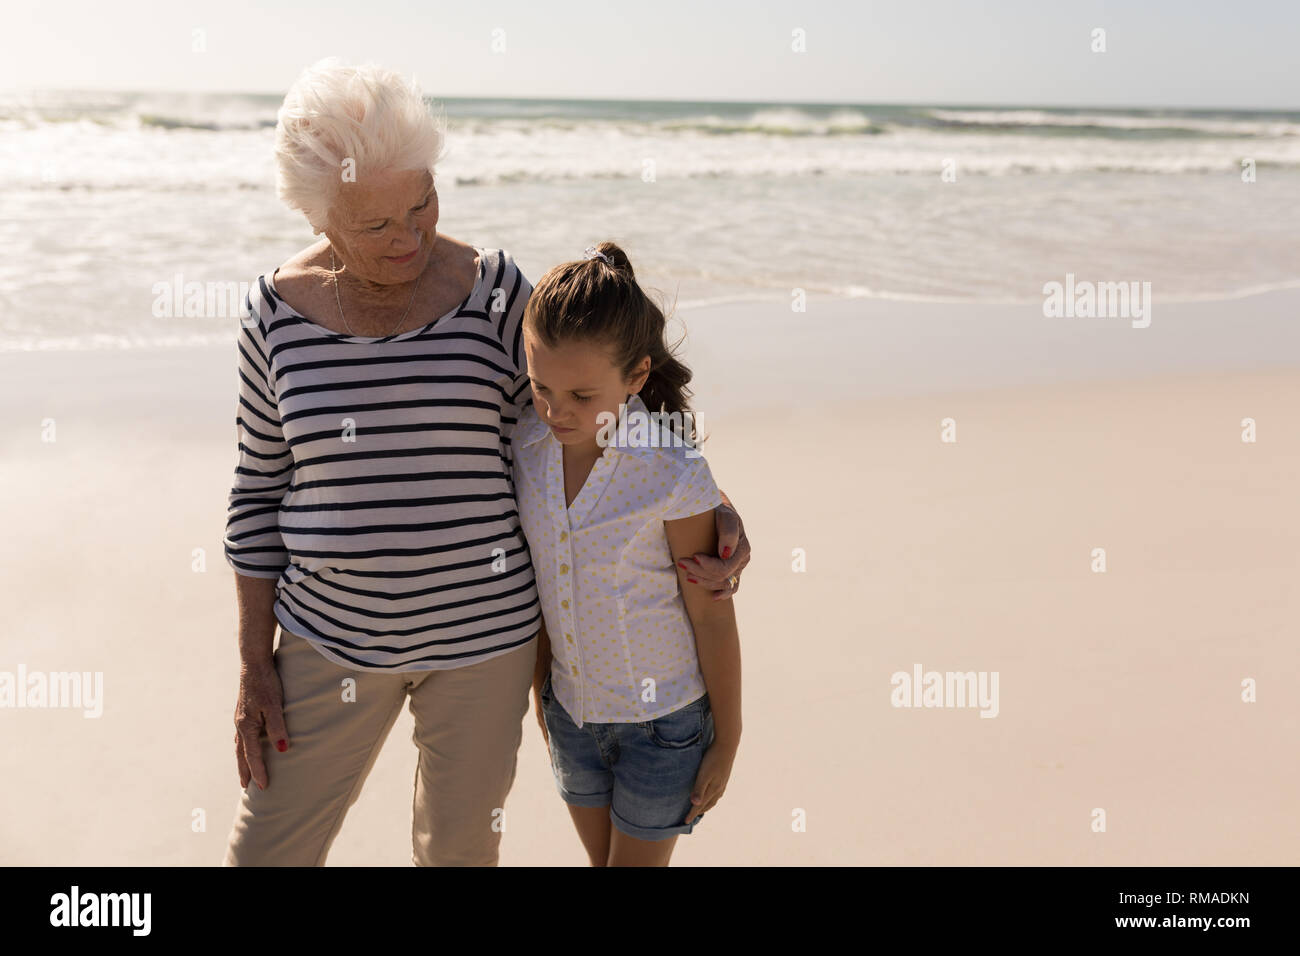 Senior woman and her granddaughter with arms around standing on beach Stock Photo